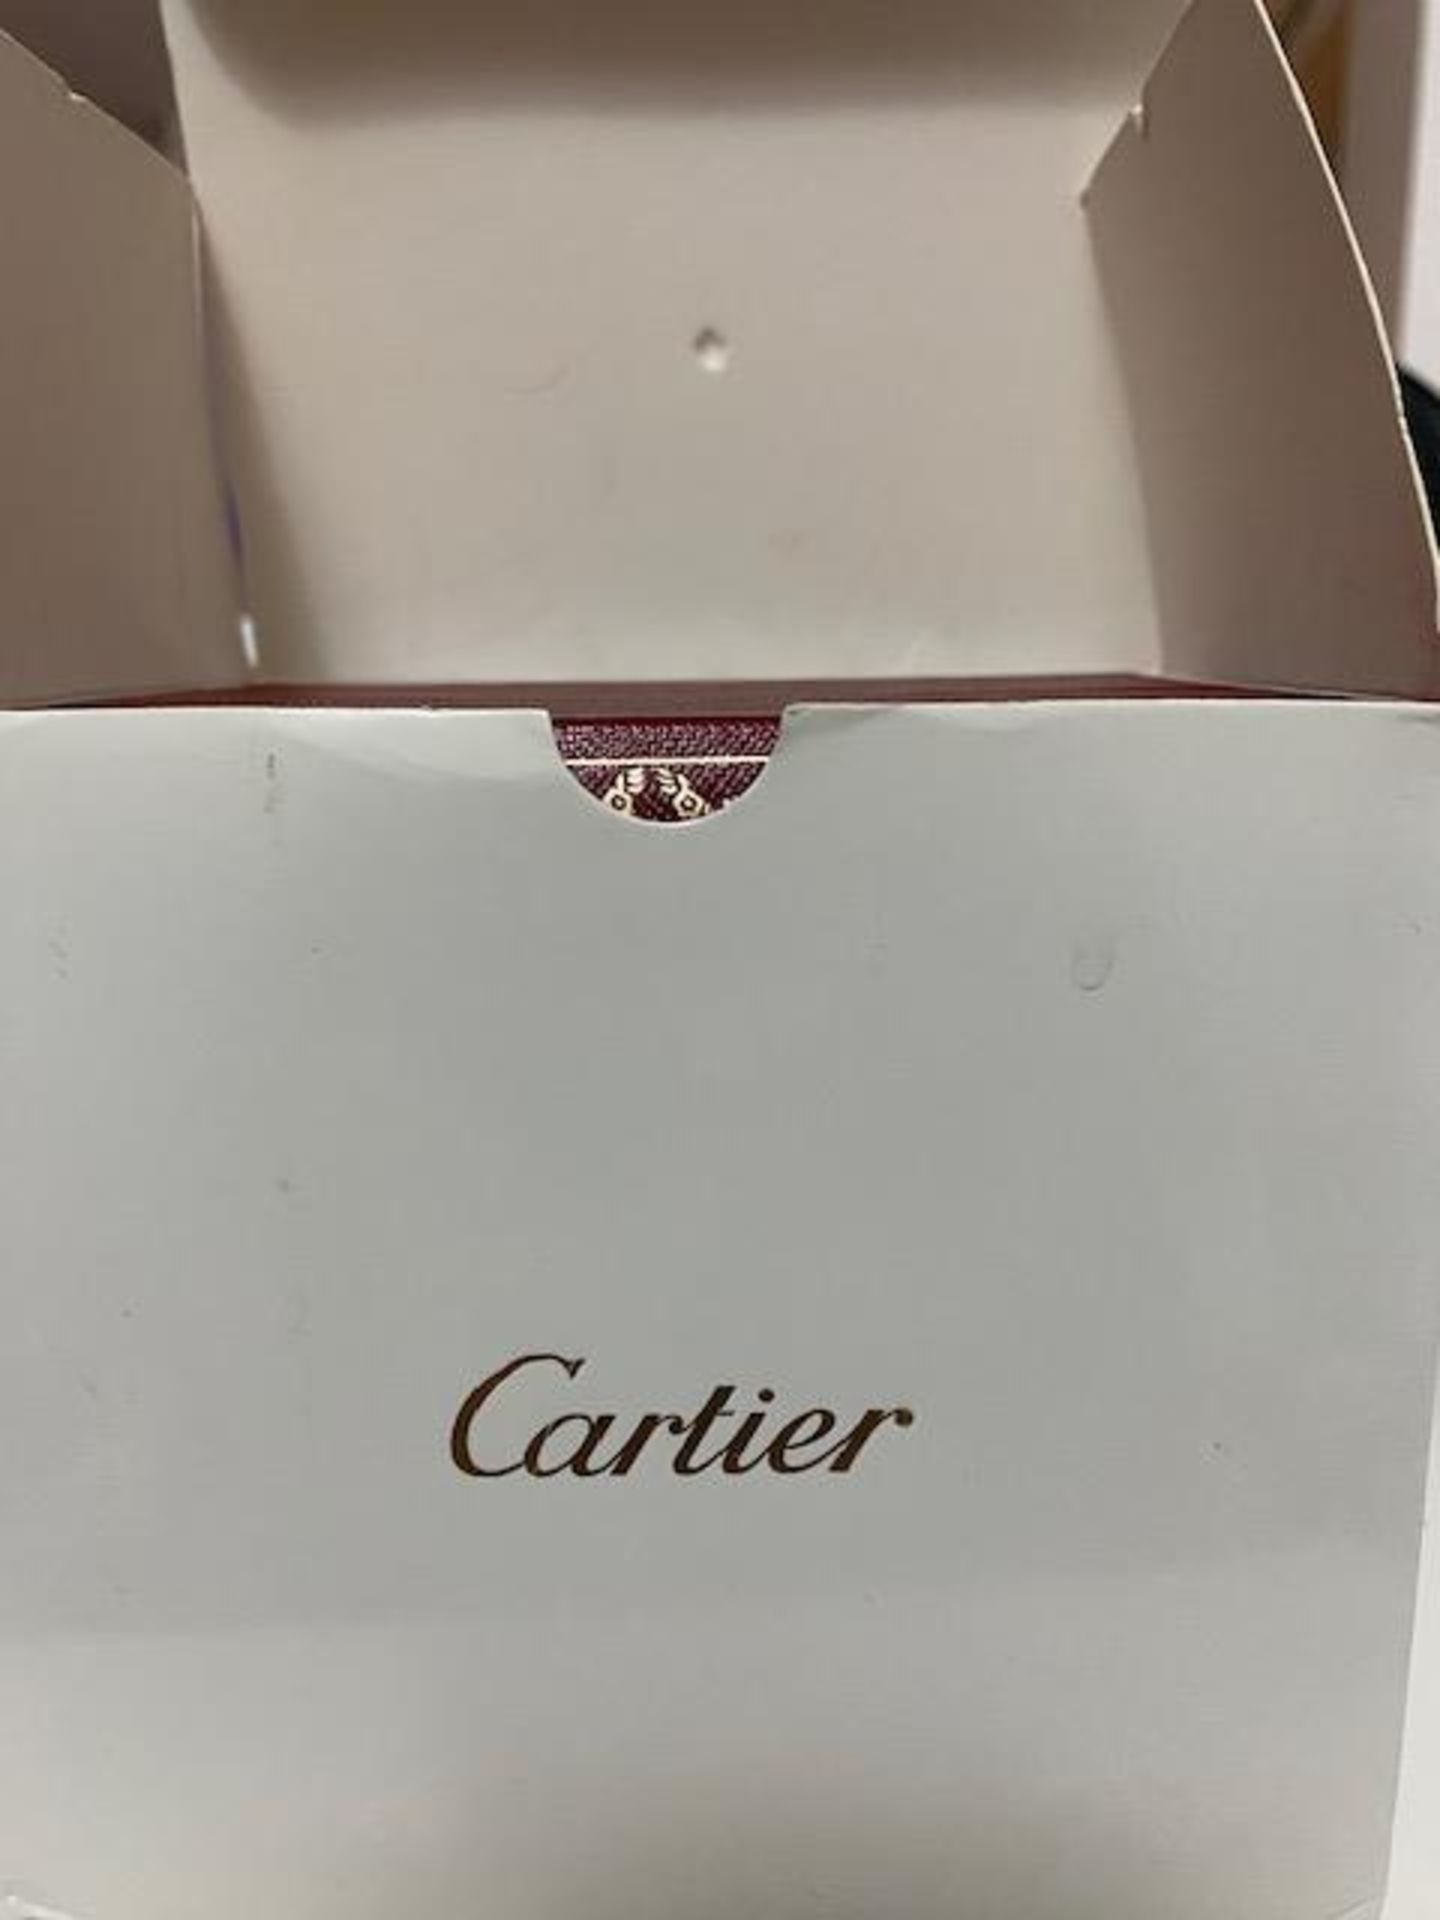 Cartier Chronoscaph Gents Watch with Original Box and Manual, Steel and Rubber Strap *NO VAT* - Image 3 of 9